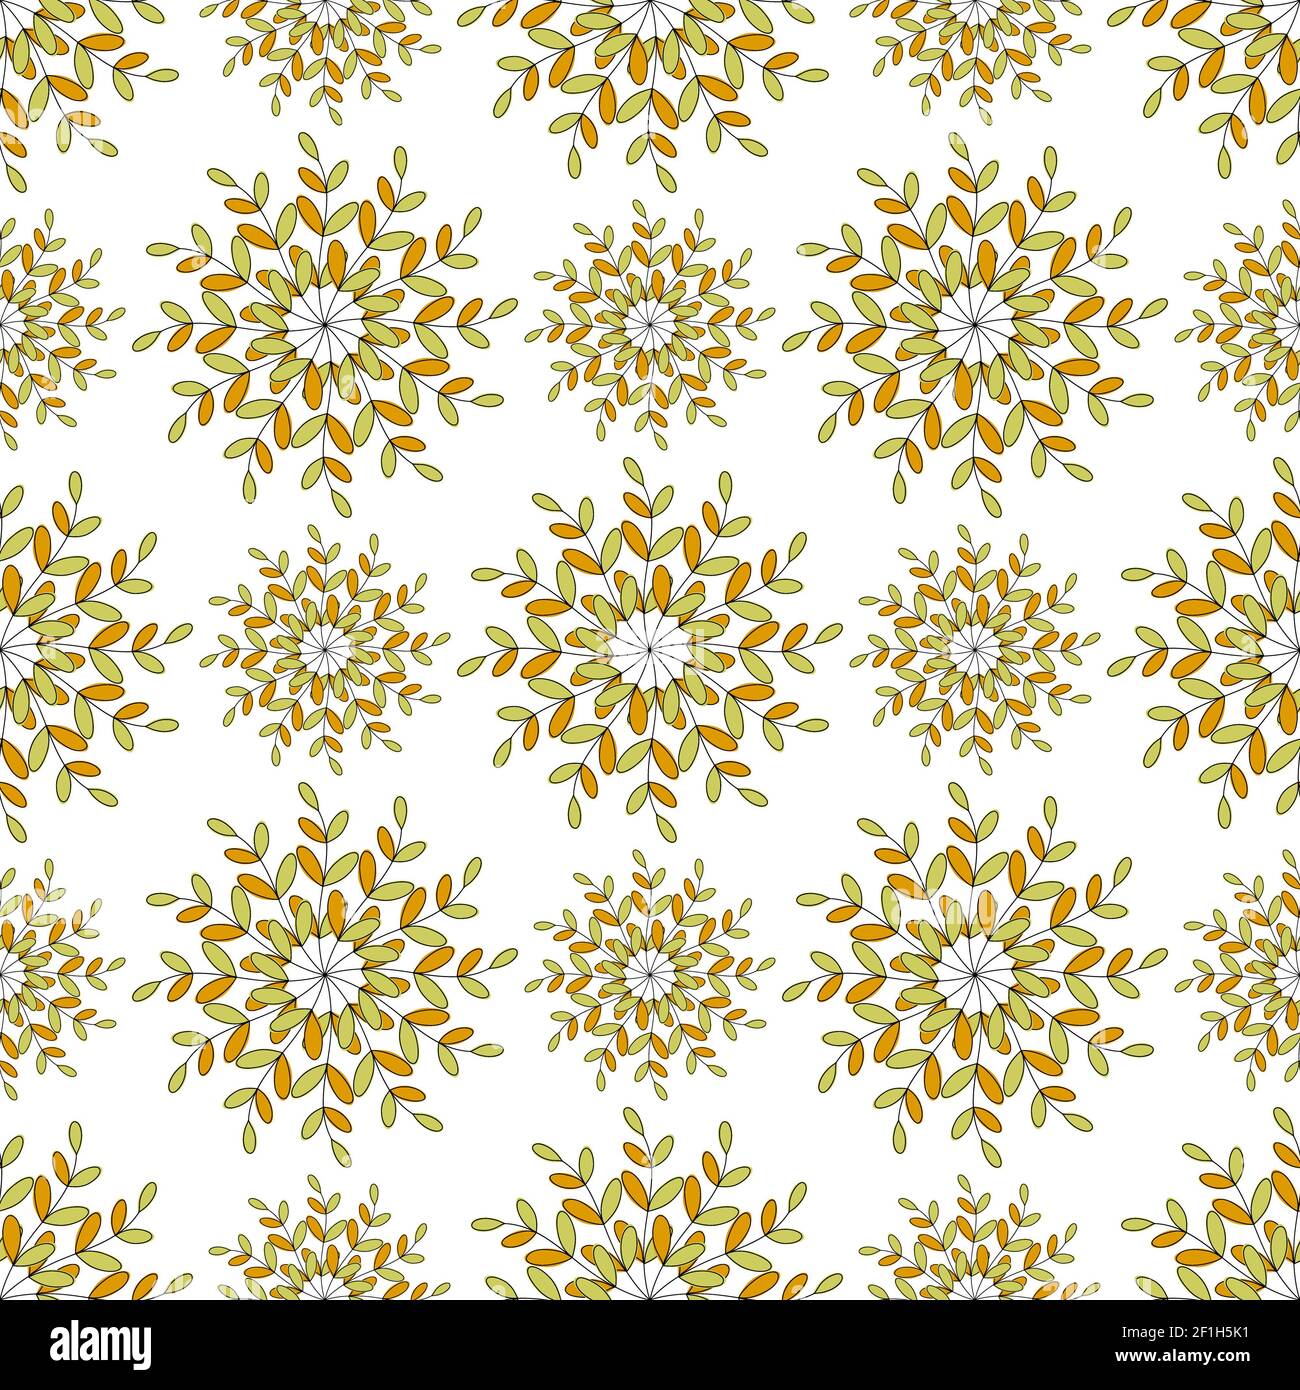 Seamless pattern of colored leaves on an orange background. Stock Photo